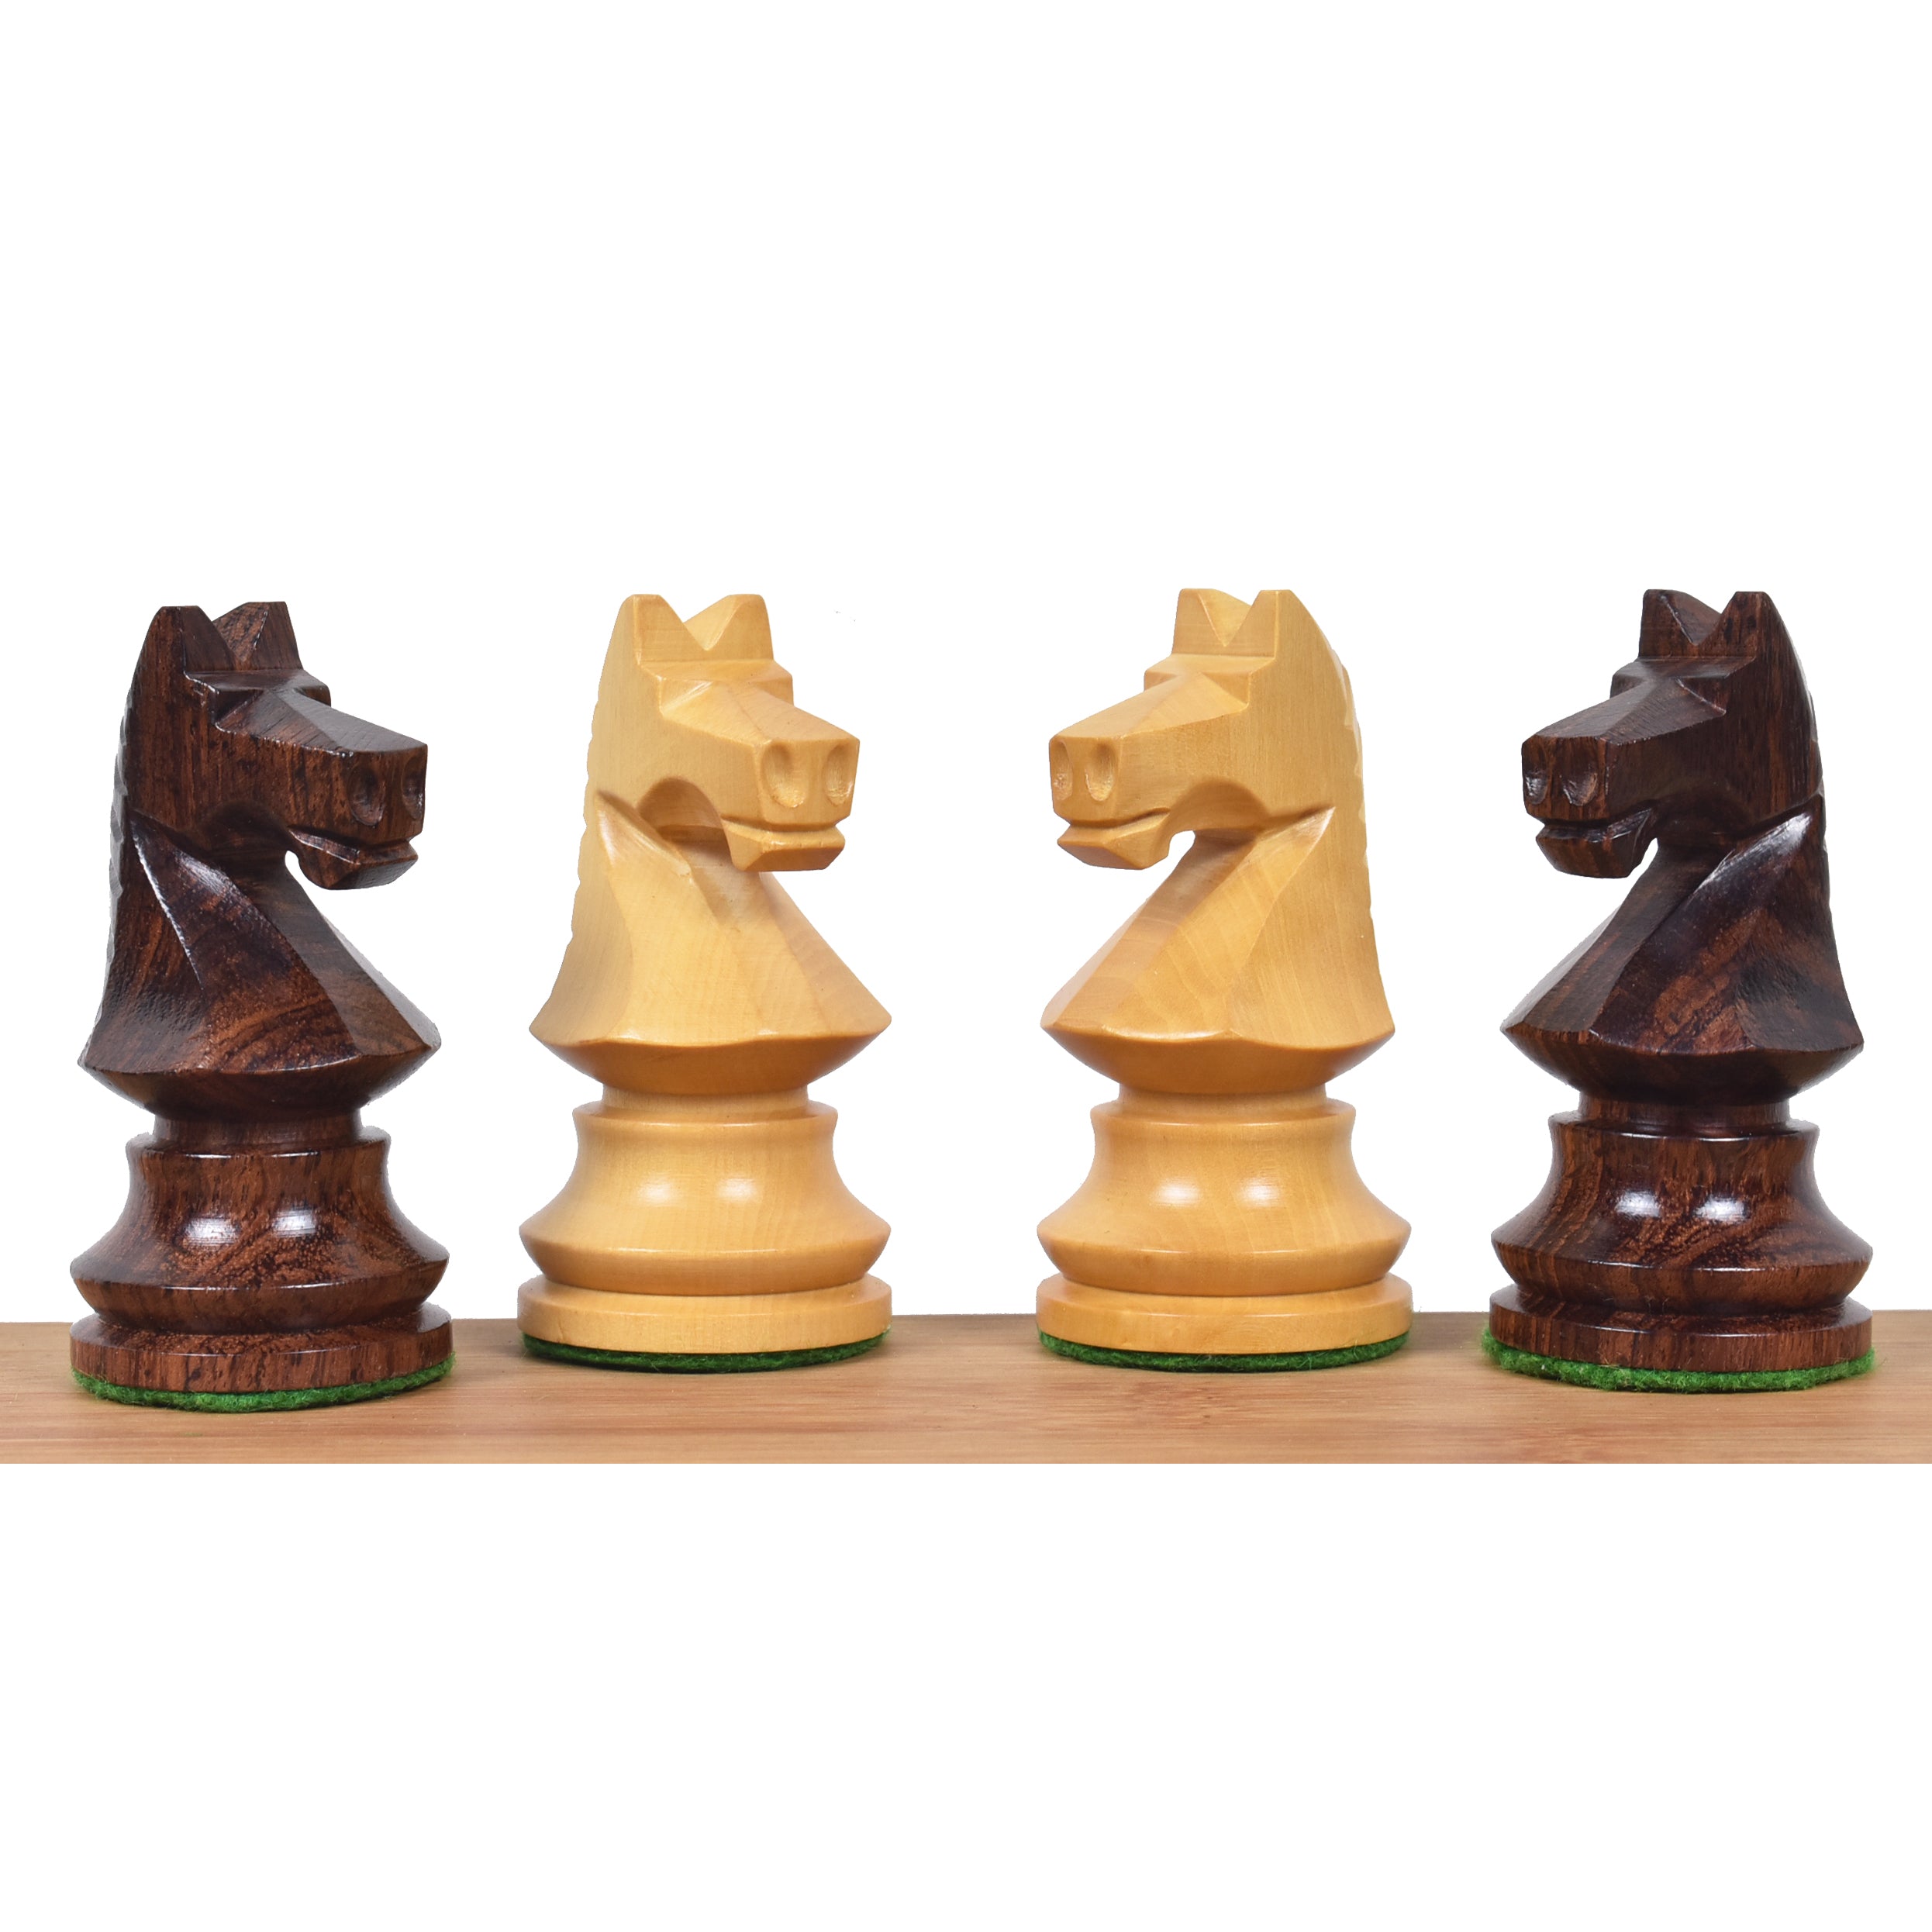 Romanian Hungarian Tournament Chess Pieces only set